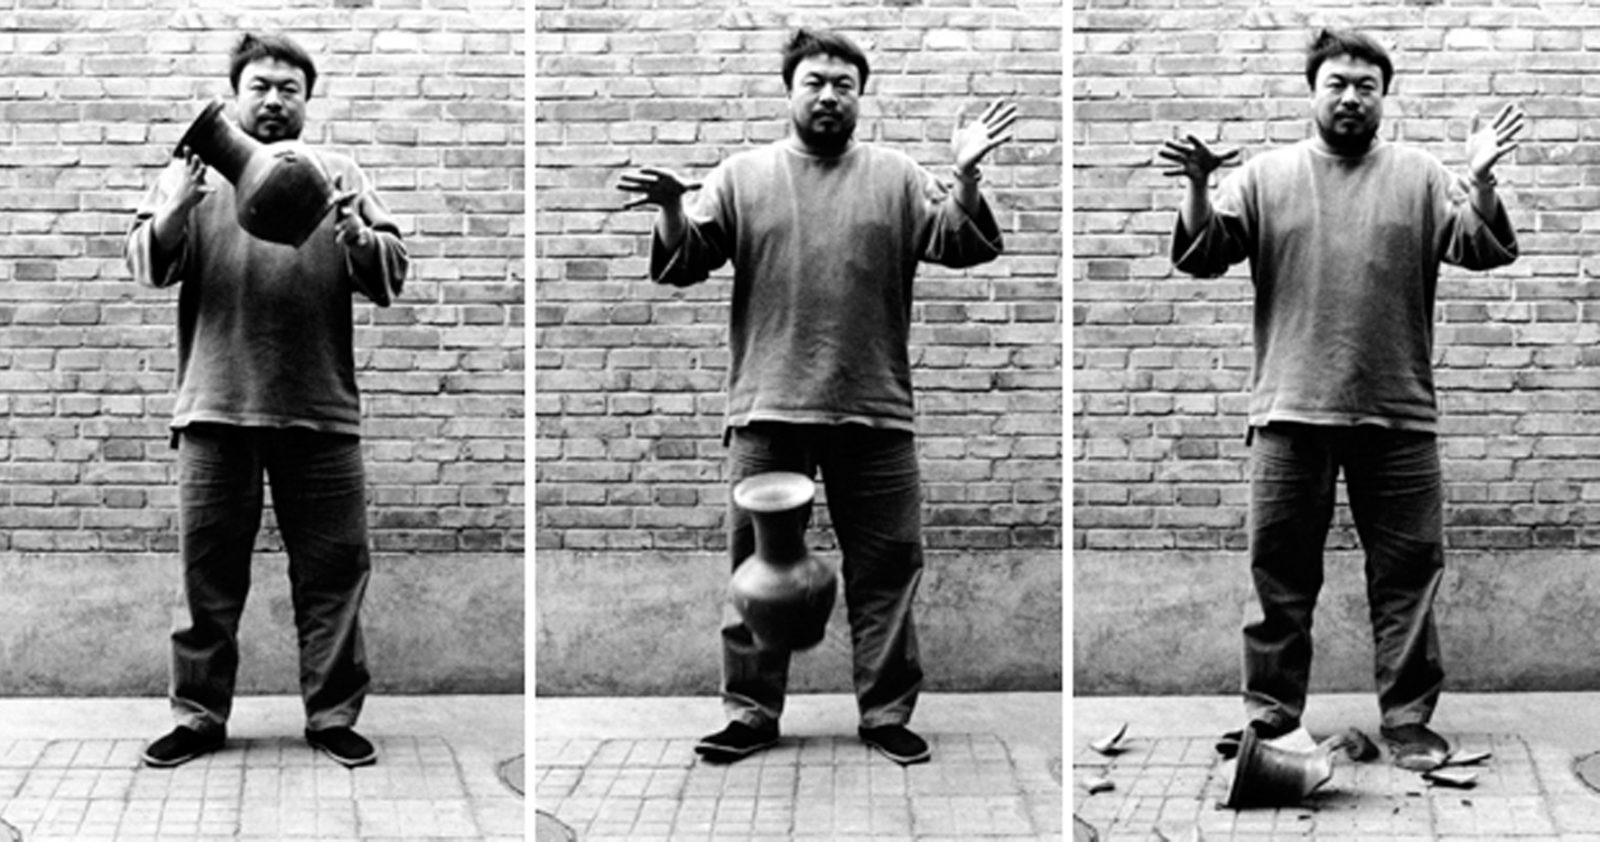 Contemporary Art. Made in China: Ai Wei Wei, Dropping a Han Dynasty Vase, 1995, private collection.